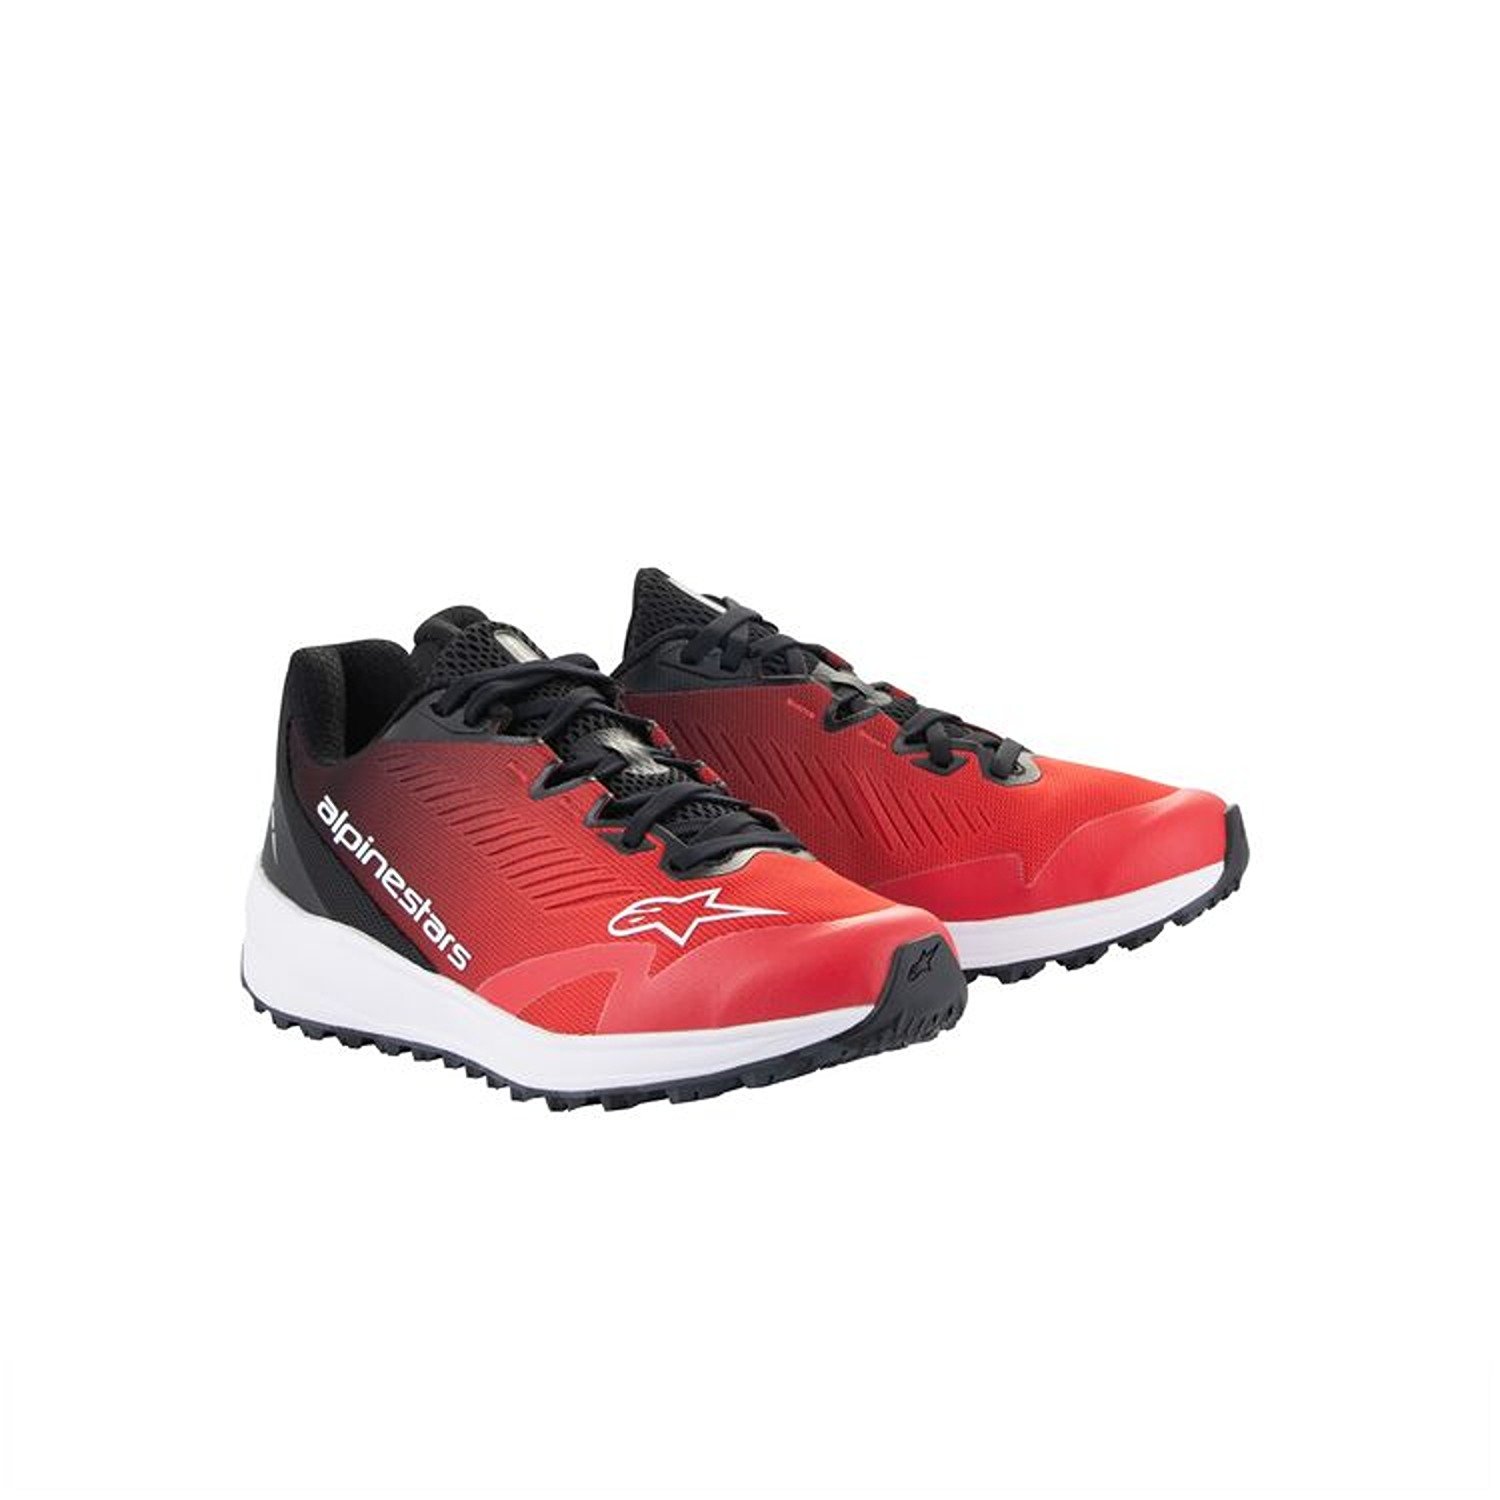 Image of Alpinestars Meta Road V2 Shoes Red Black White Taille US 55